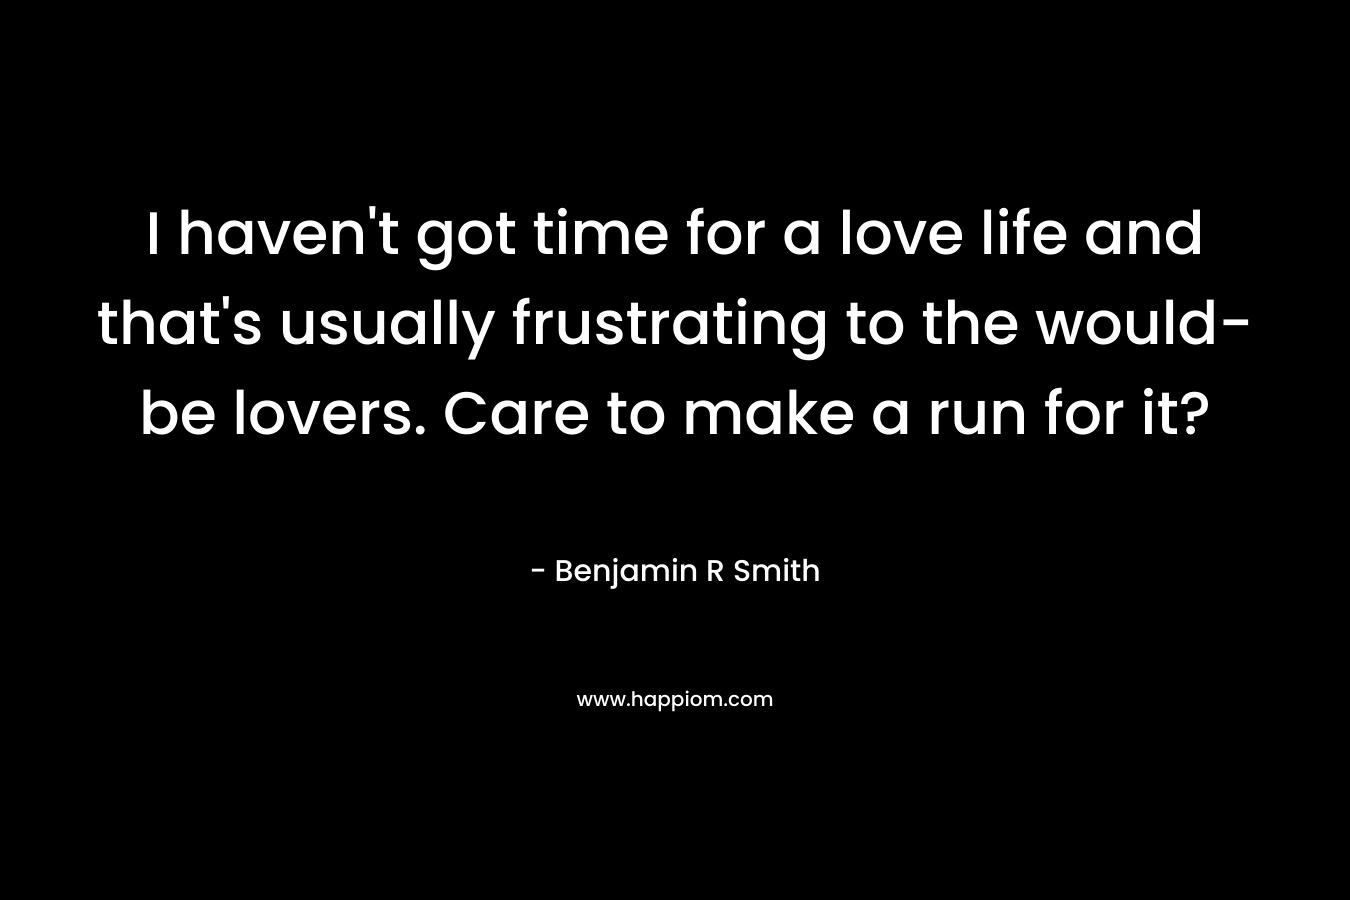 I haven’t got time for a love life and that’s usually frustrating to the would-be lovers. Care to make a run for it? – Benjamin R  Smith